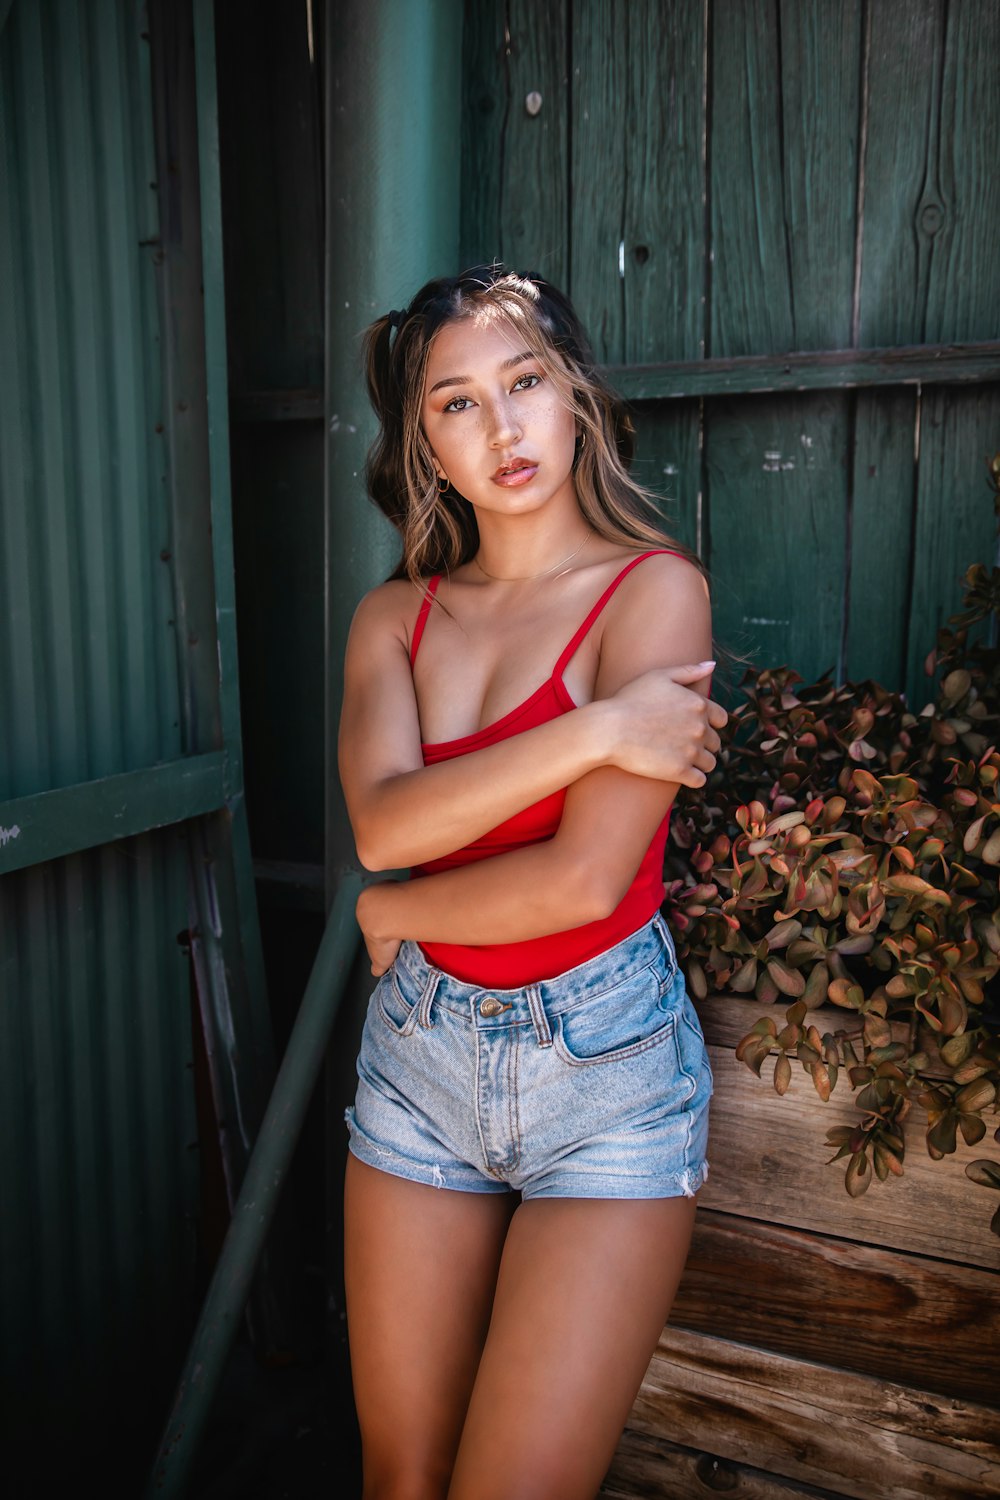 Woman in red tank top and blue denim shorts standing near green wooden wall  photo – Free Model face Image on Unsplash